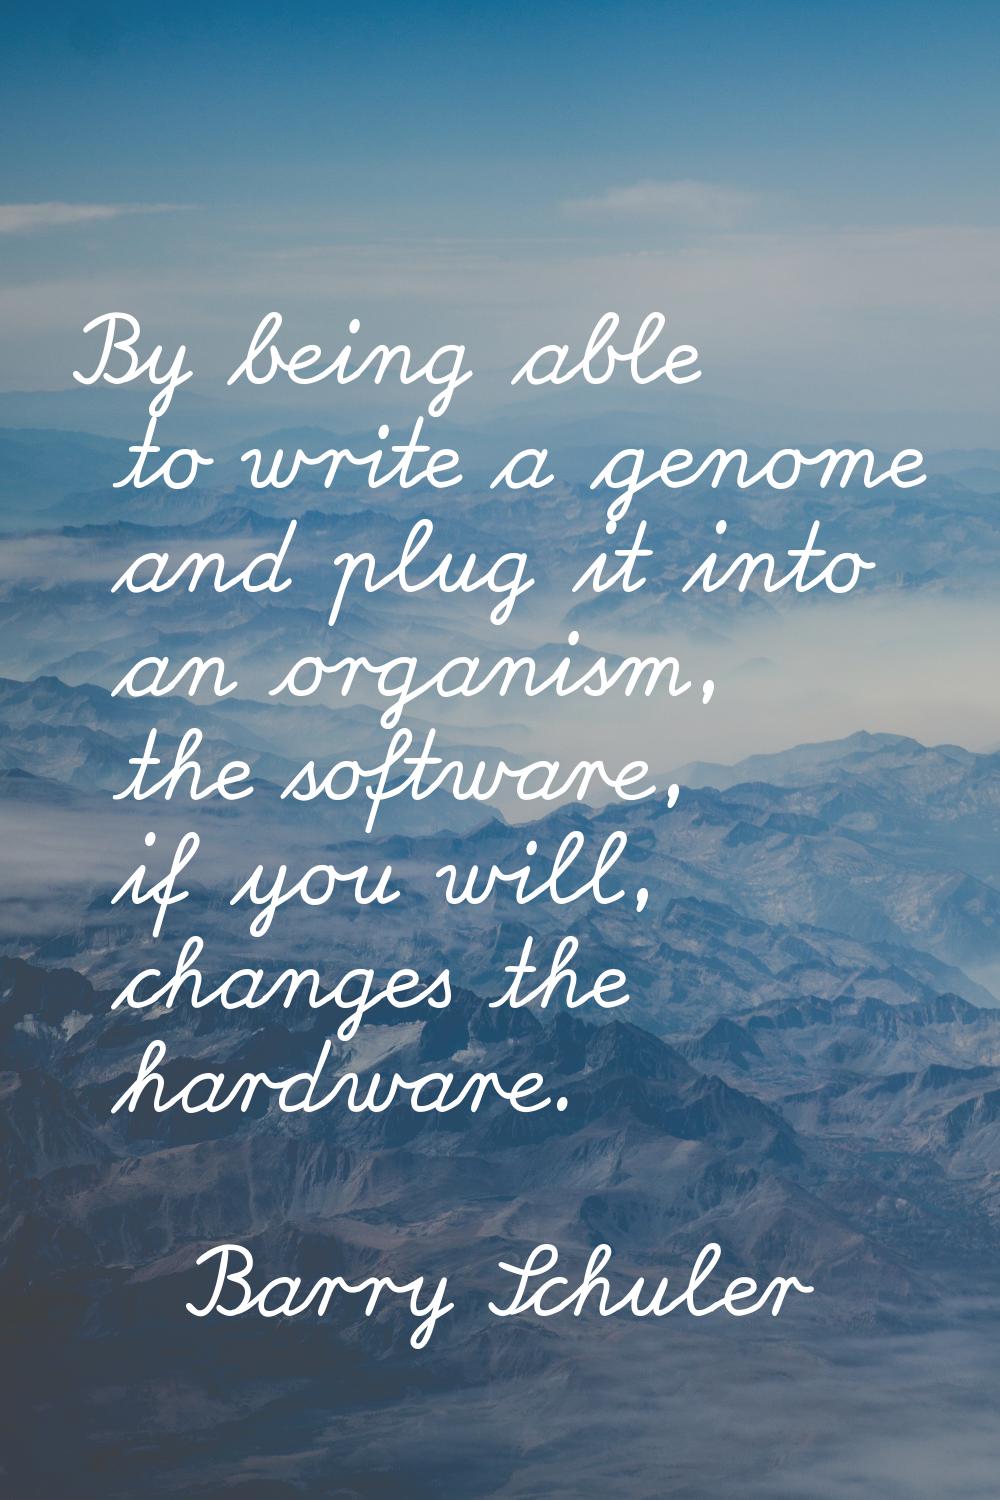 By being able to write a genome and plug it into an organism, the software, if you will, changes th